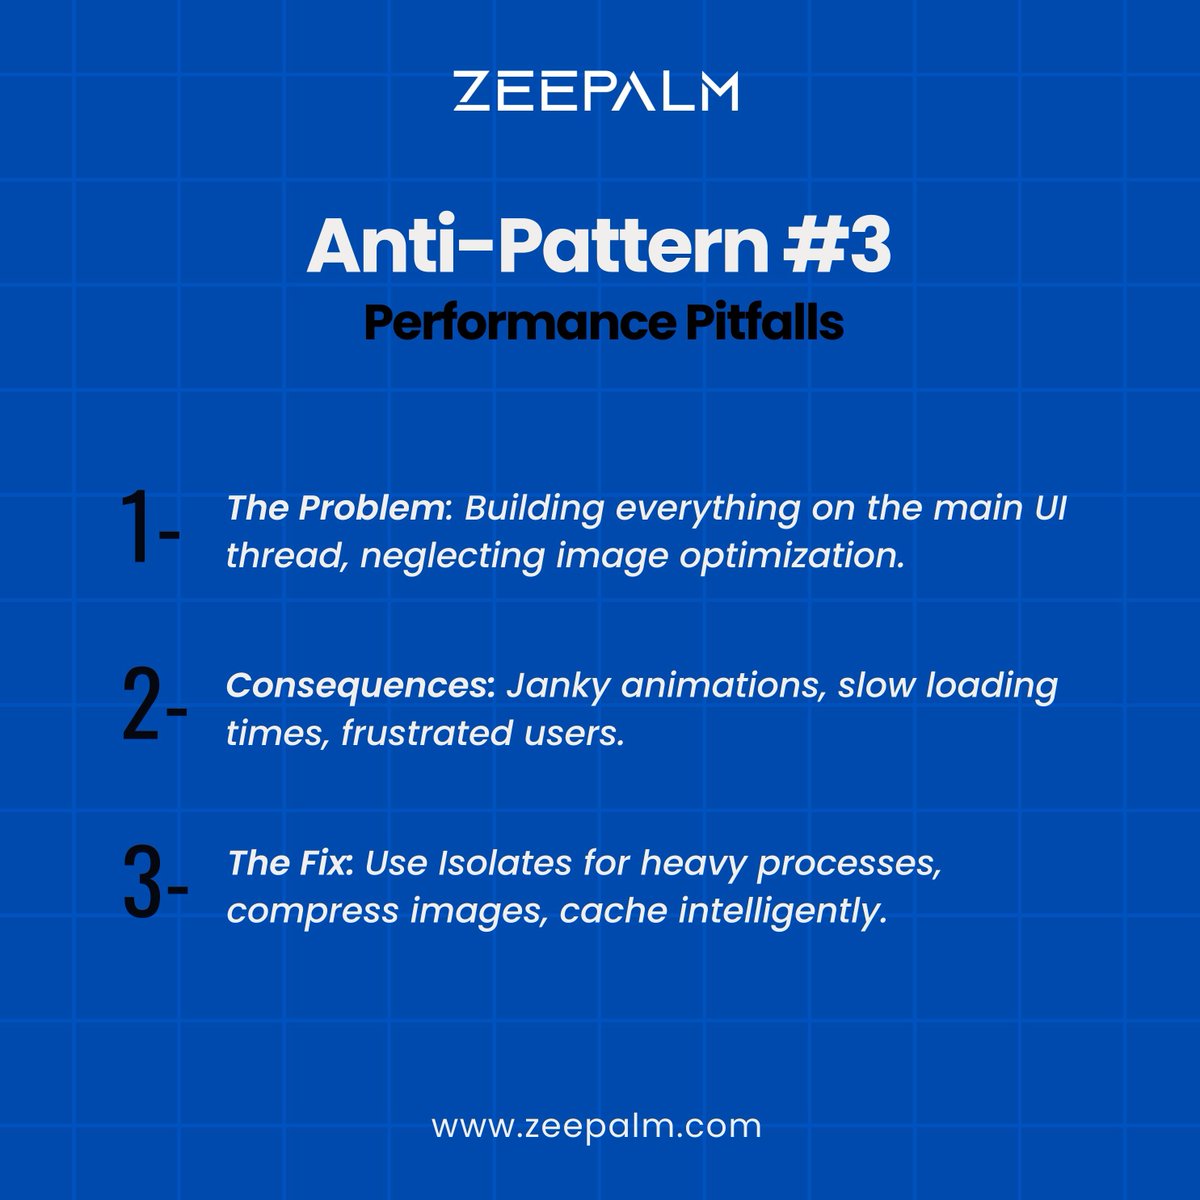 Even experienced Flutter devs can fall into bad habits! Swipe to identify common anti-patterns and learn how to fix them.  Want to ensure your Flutter projects are built on solid foundations? Zee Palm has the expertise. #Flutter #antipatterns #appdevelopment #cleancode